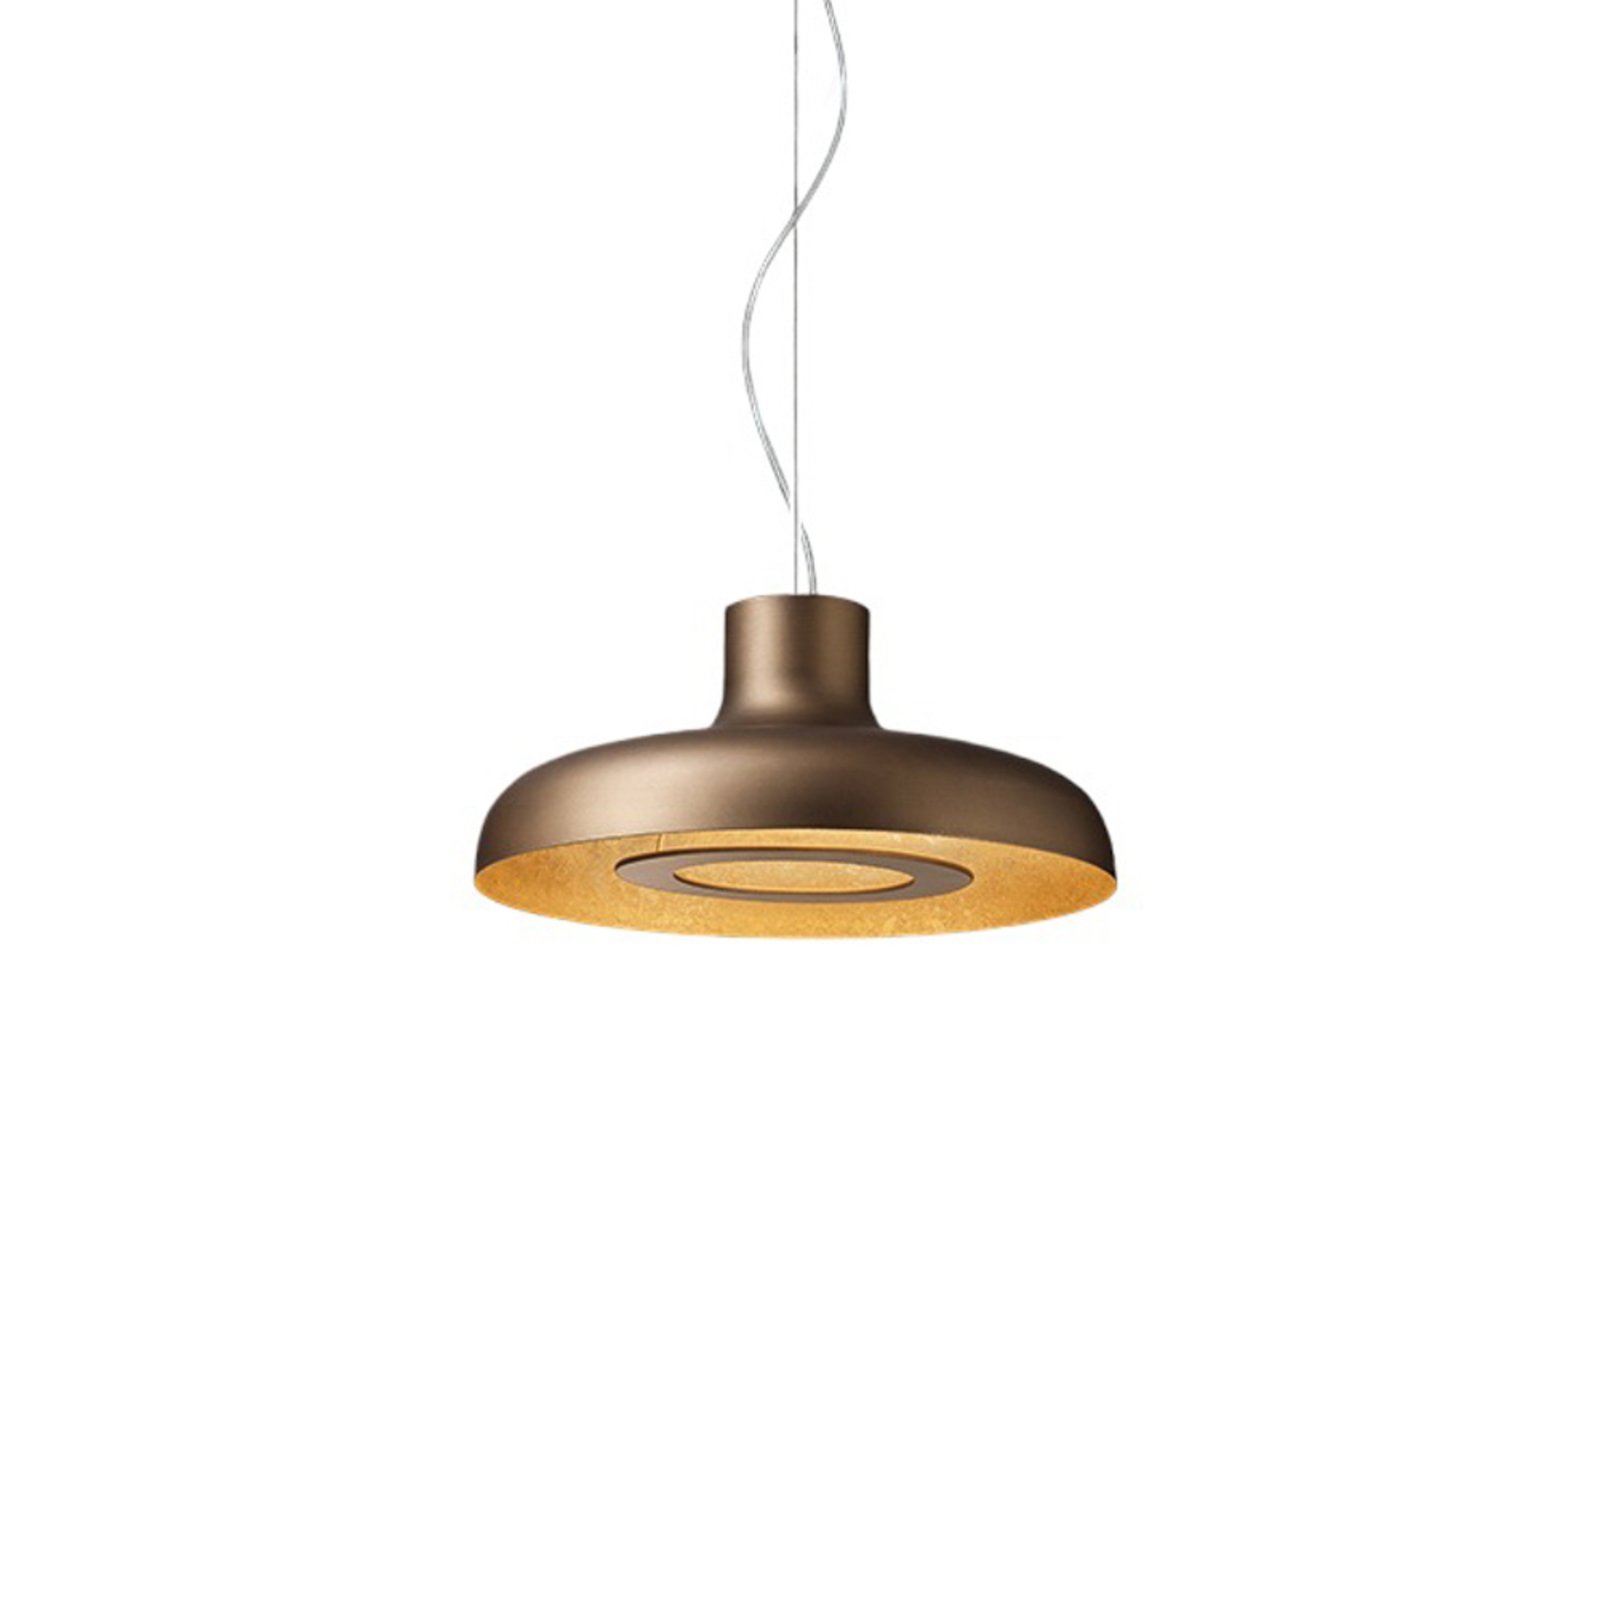 ICONE Duetto LED hanging light 927 Ø55cm bronze/gold